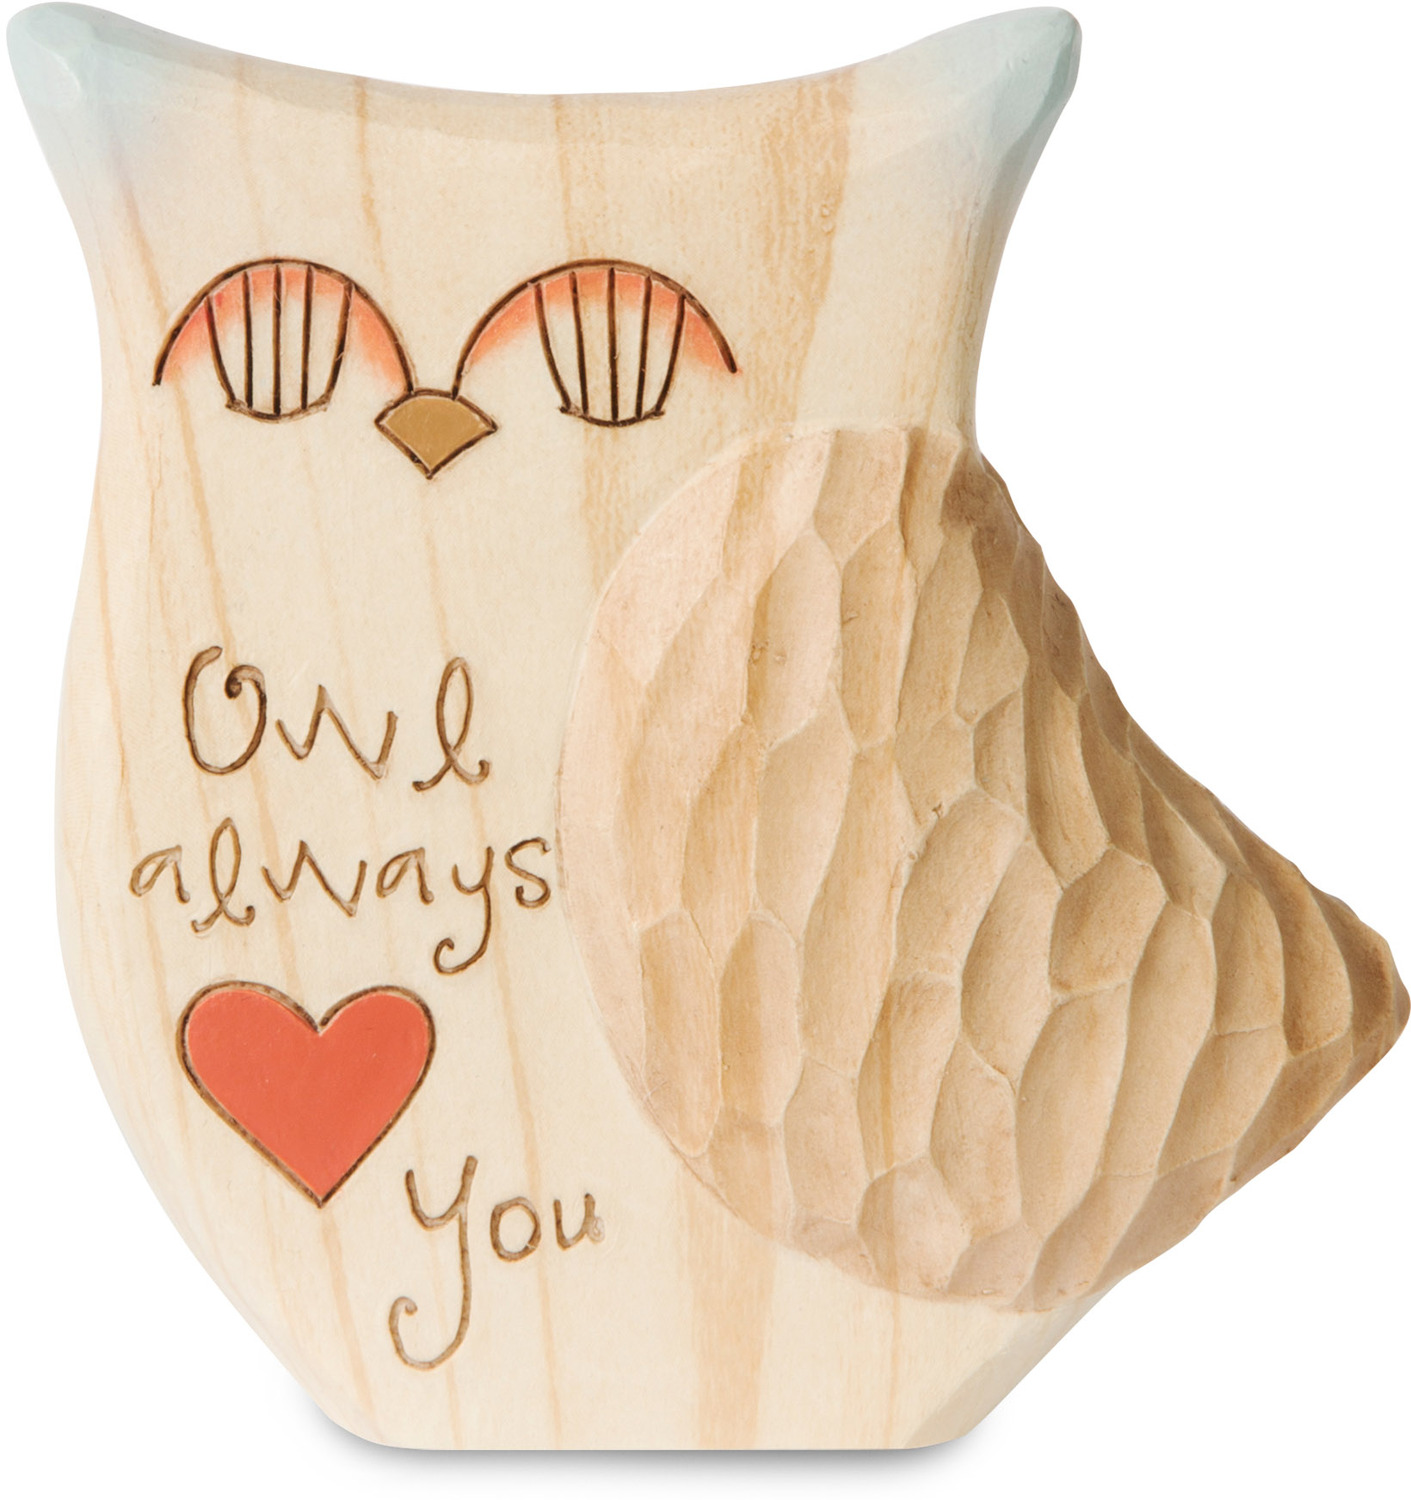 Owl Always Love You by Heavenly Woods - Owl Always Love You - 3.5" Painted Owl Figurine/Carving